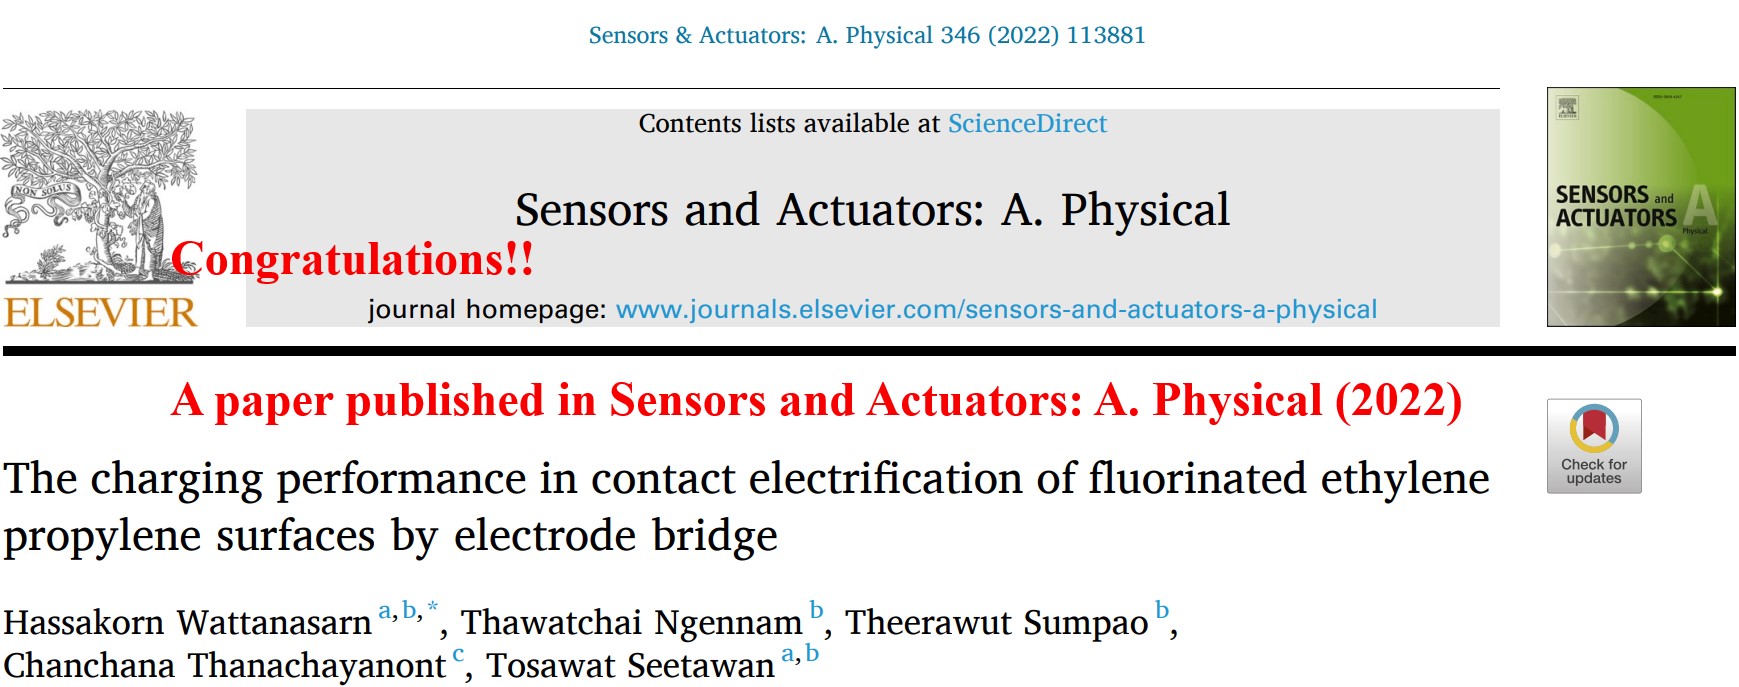 A paper published in Sensors and Actuators: A. Physical (2022)